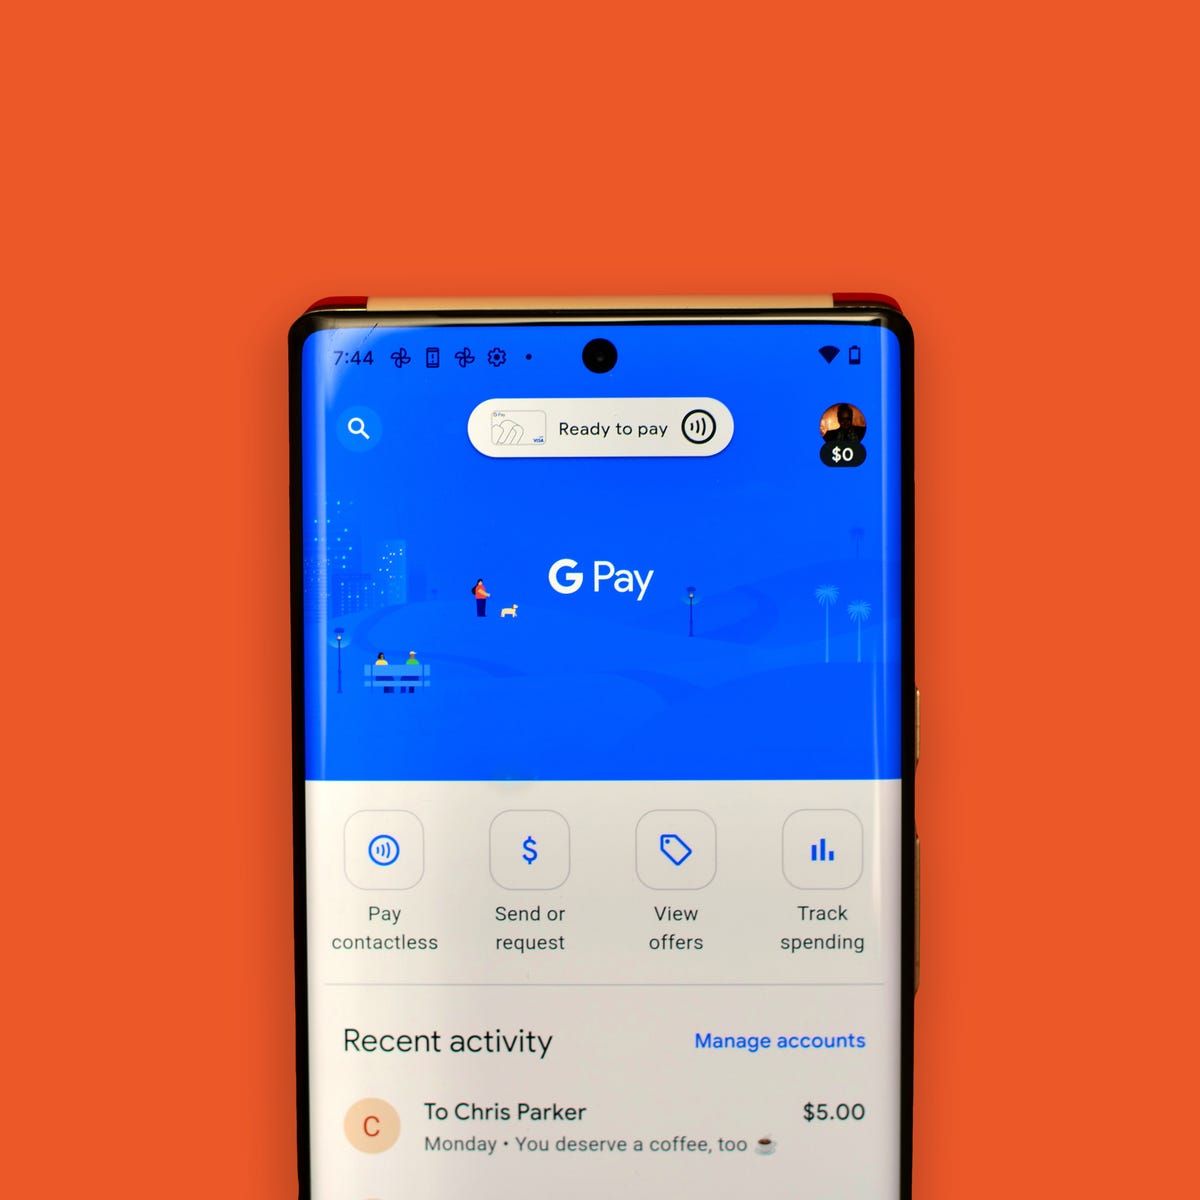 Is Google Pay and GPay the same thing?